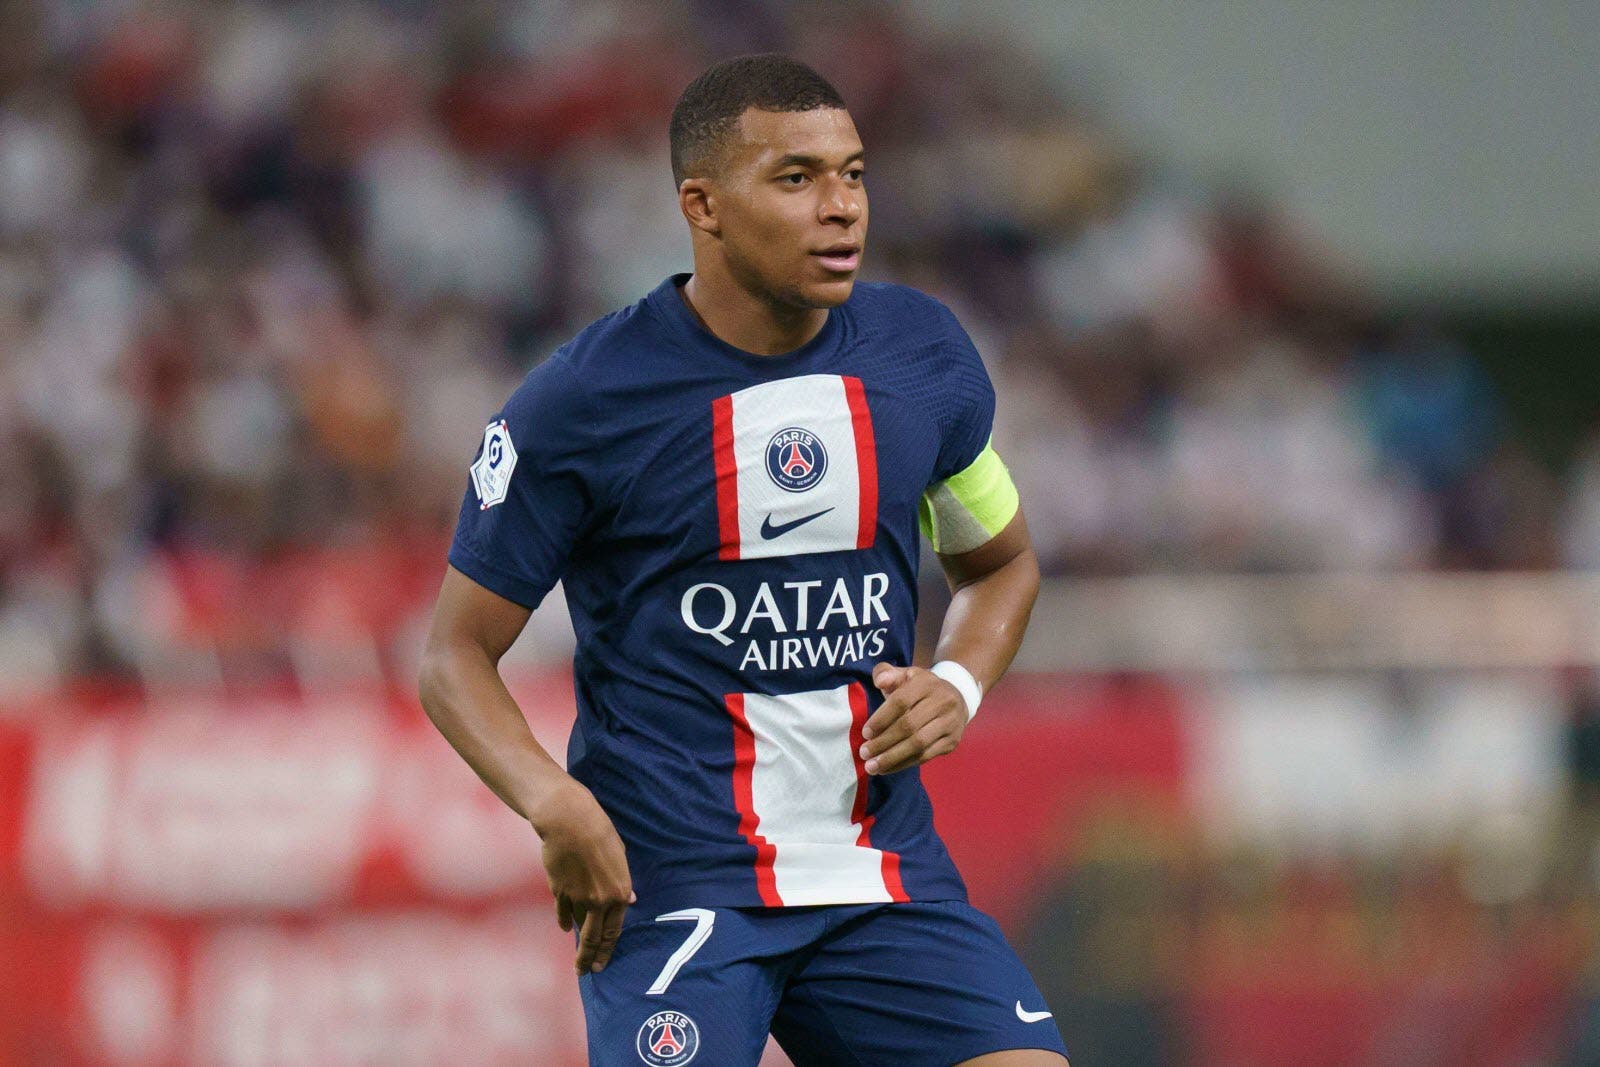 Real Madrid's diplomatic plan to convince Mbappé in January
